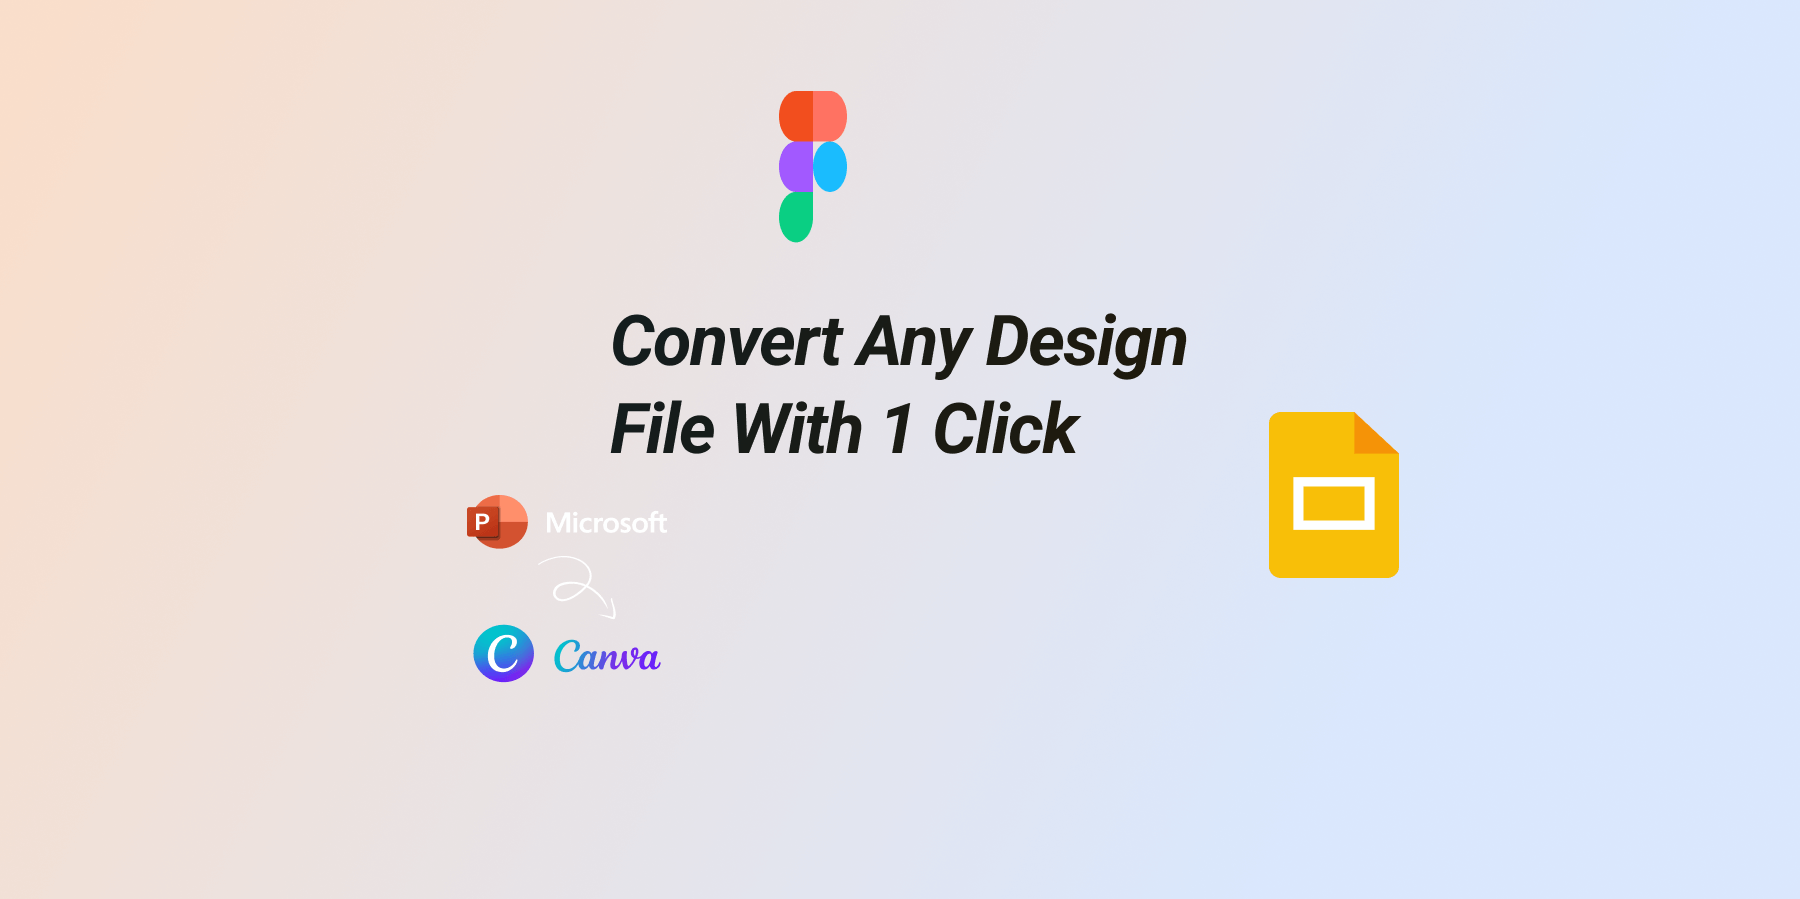 How to Convert Any Design File with 1 Click